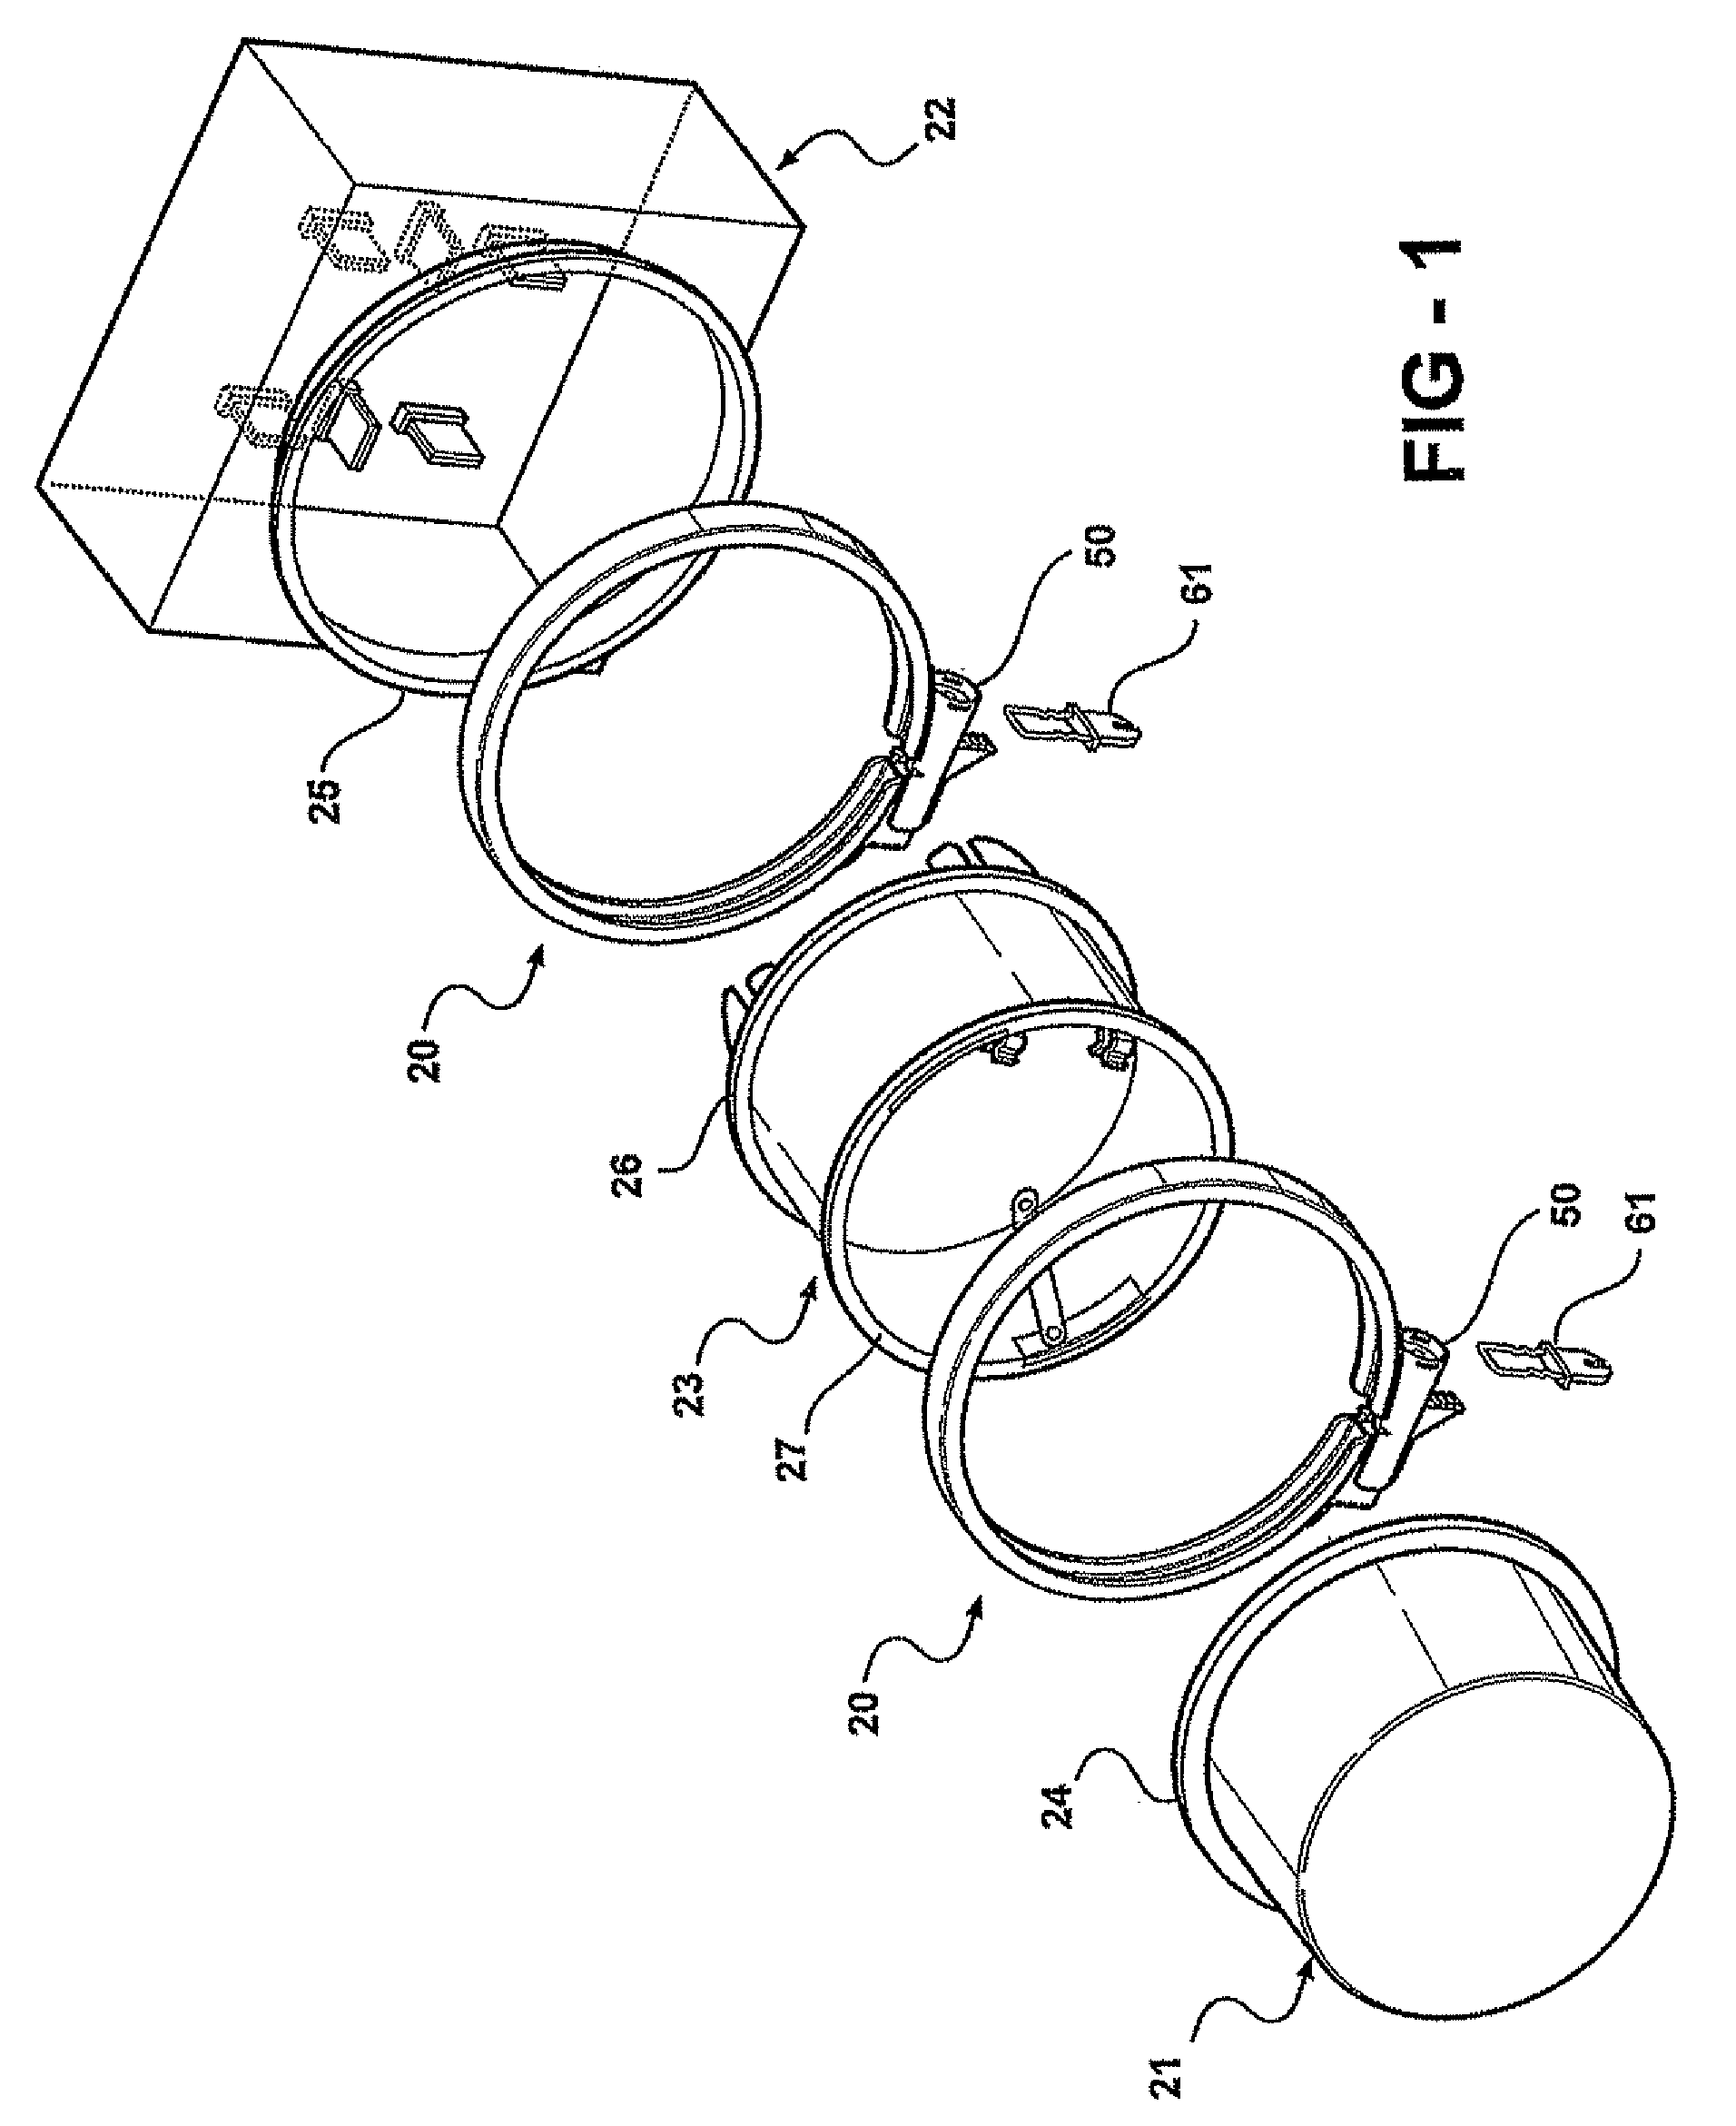 Lock ring for a watthour meter application